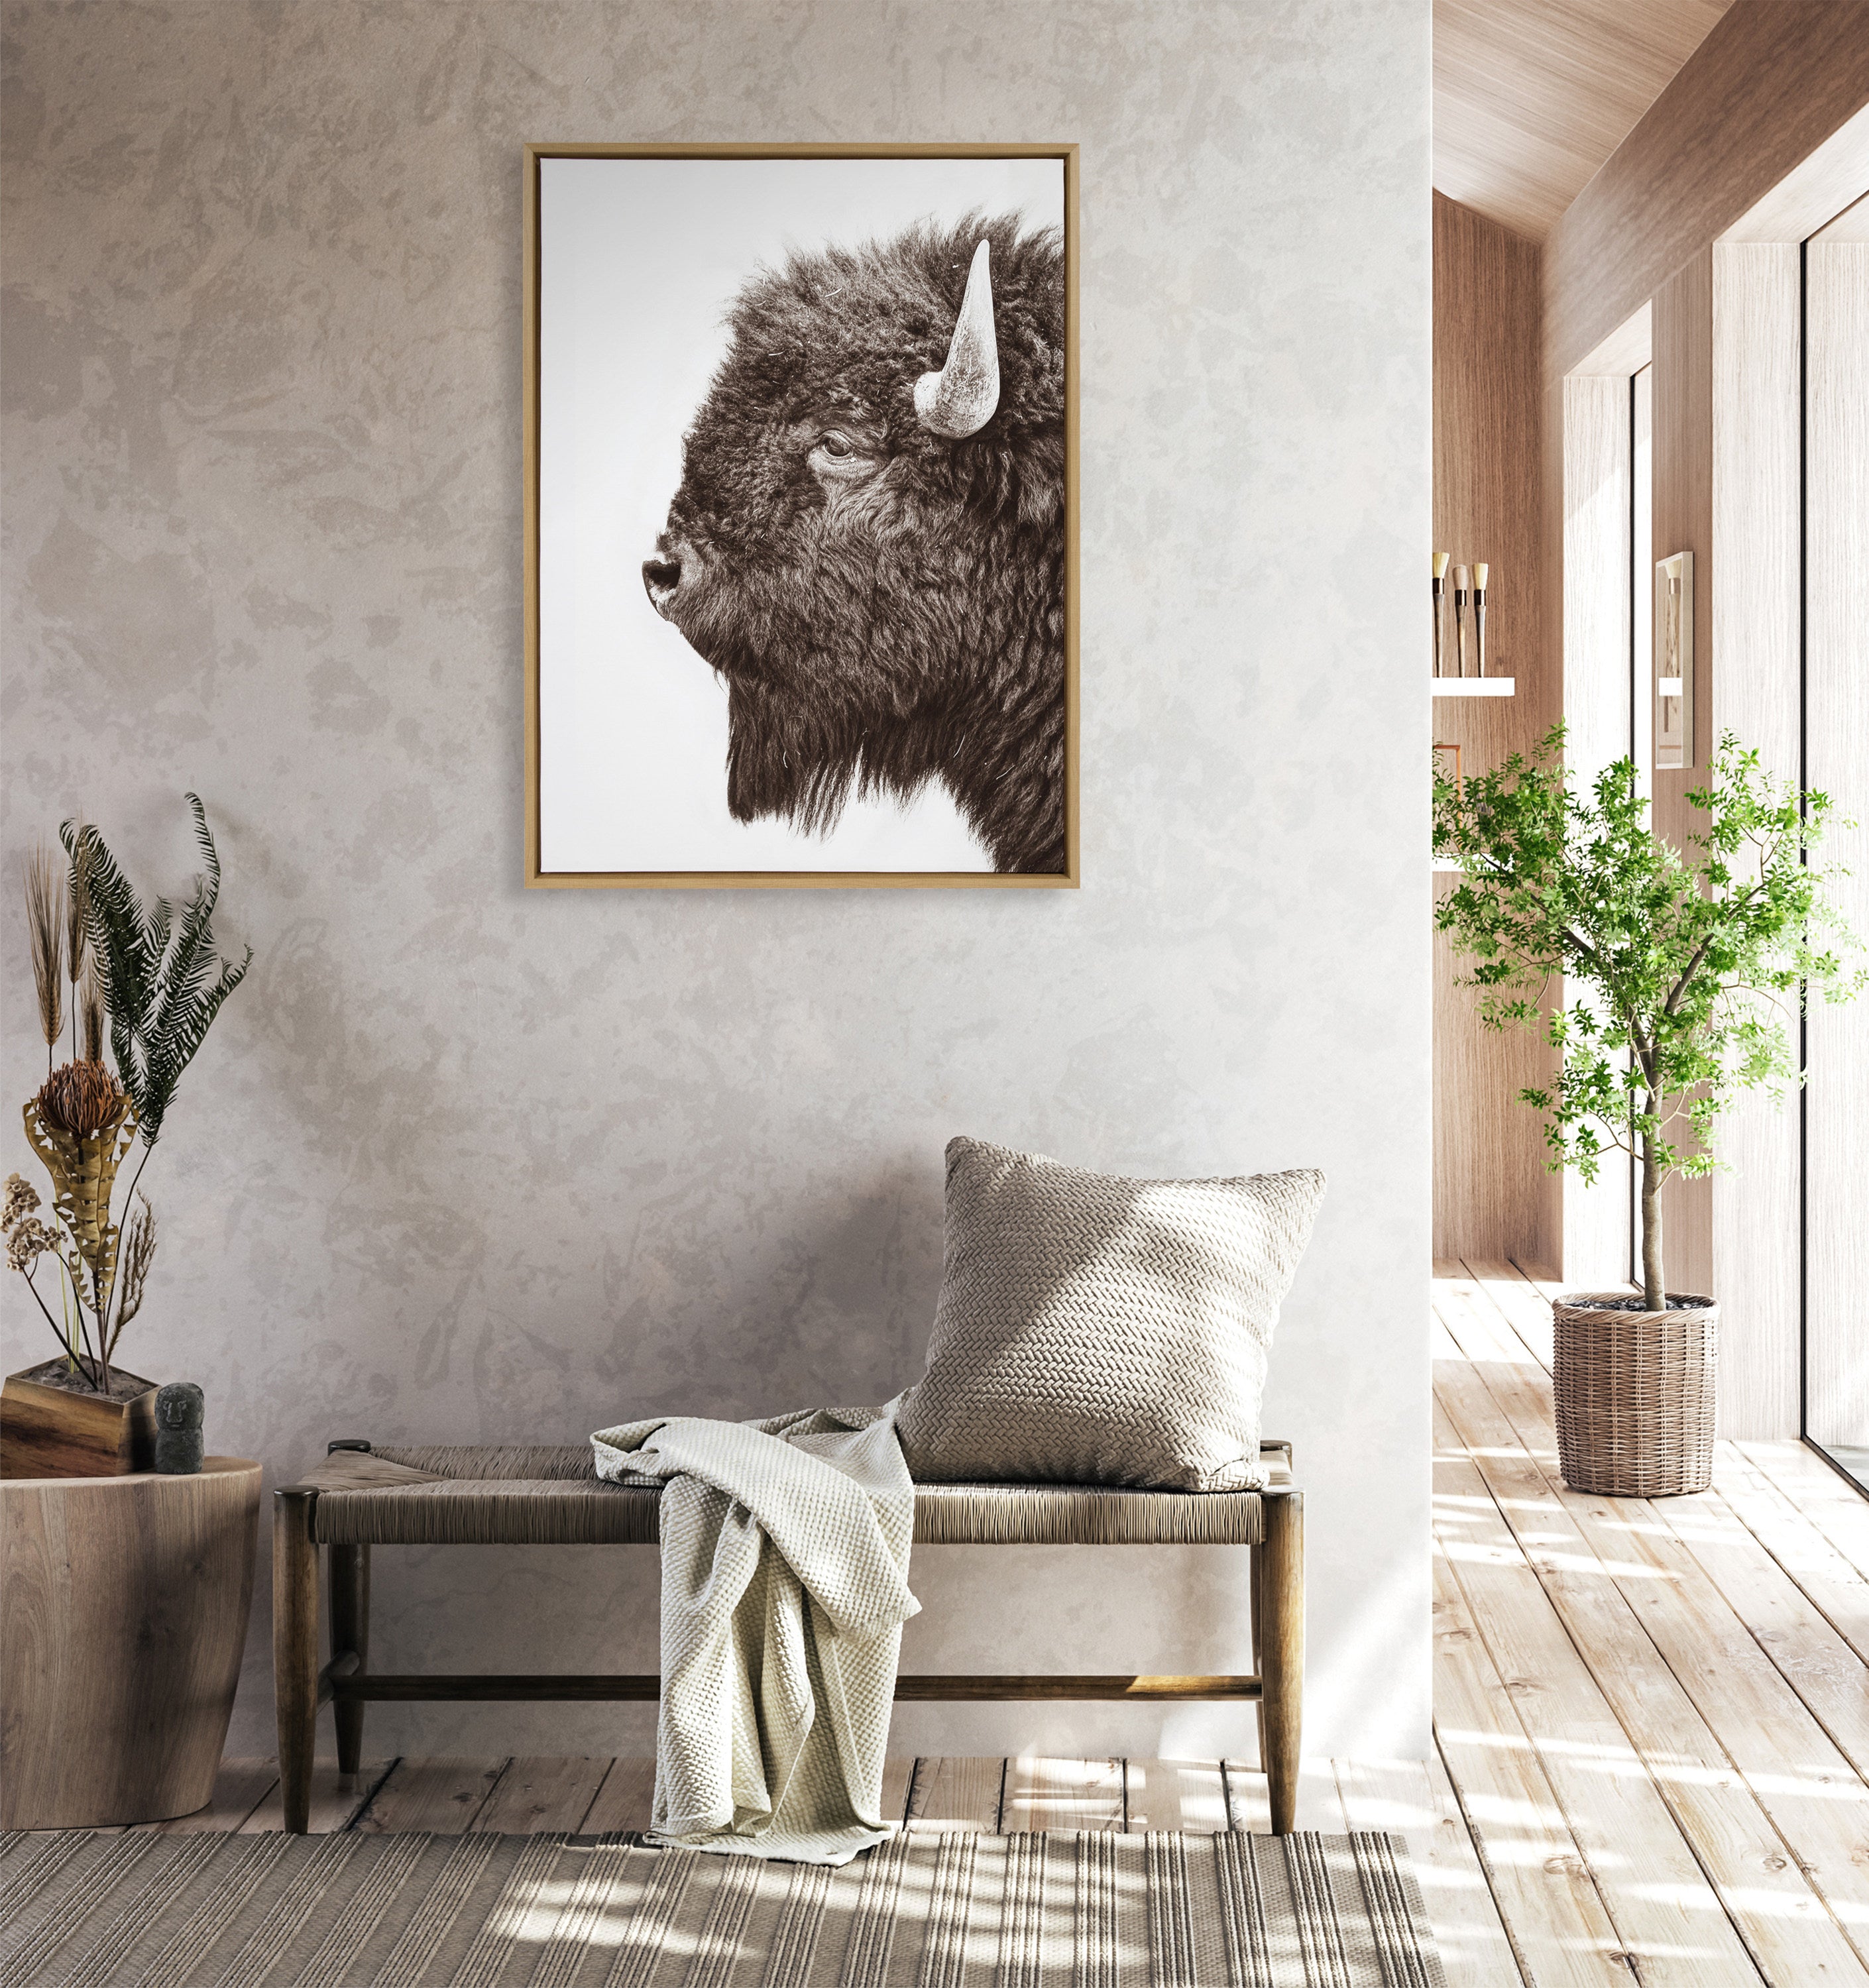 Sylvie Bison Profile Framed Canvas by Amy Peterson Art Studio